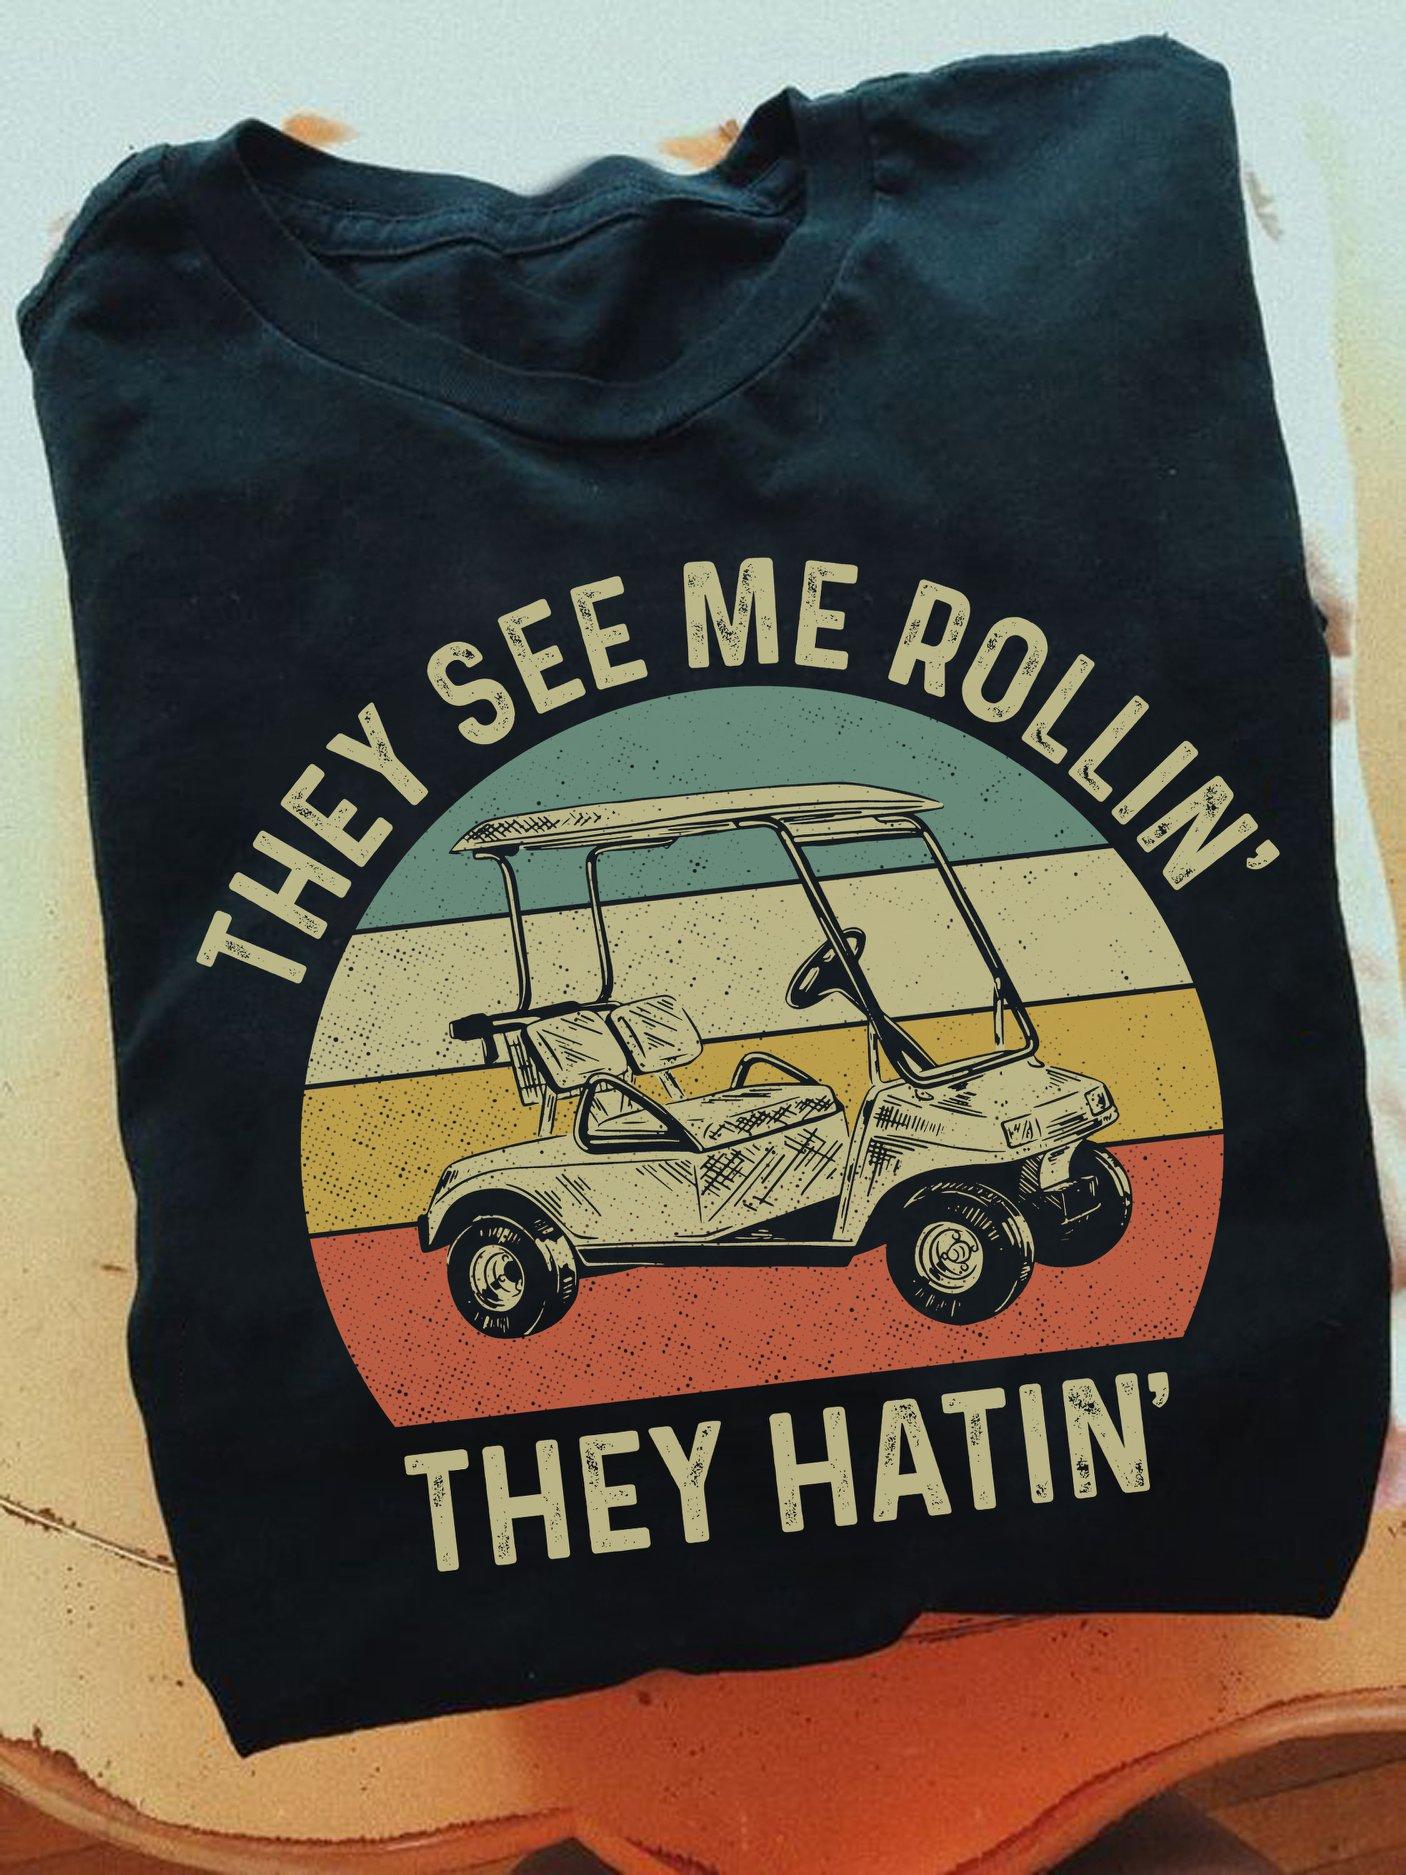 They see me rolling they hatin - Golf cart graphic T-shirt, gift for golfers